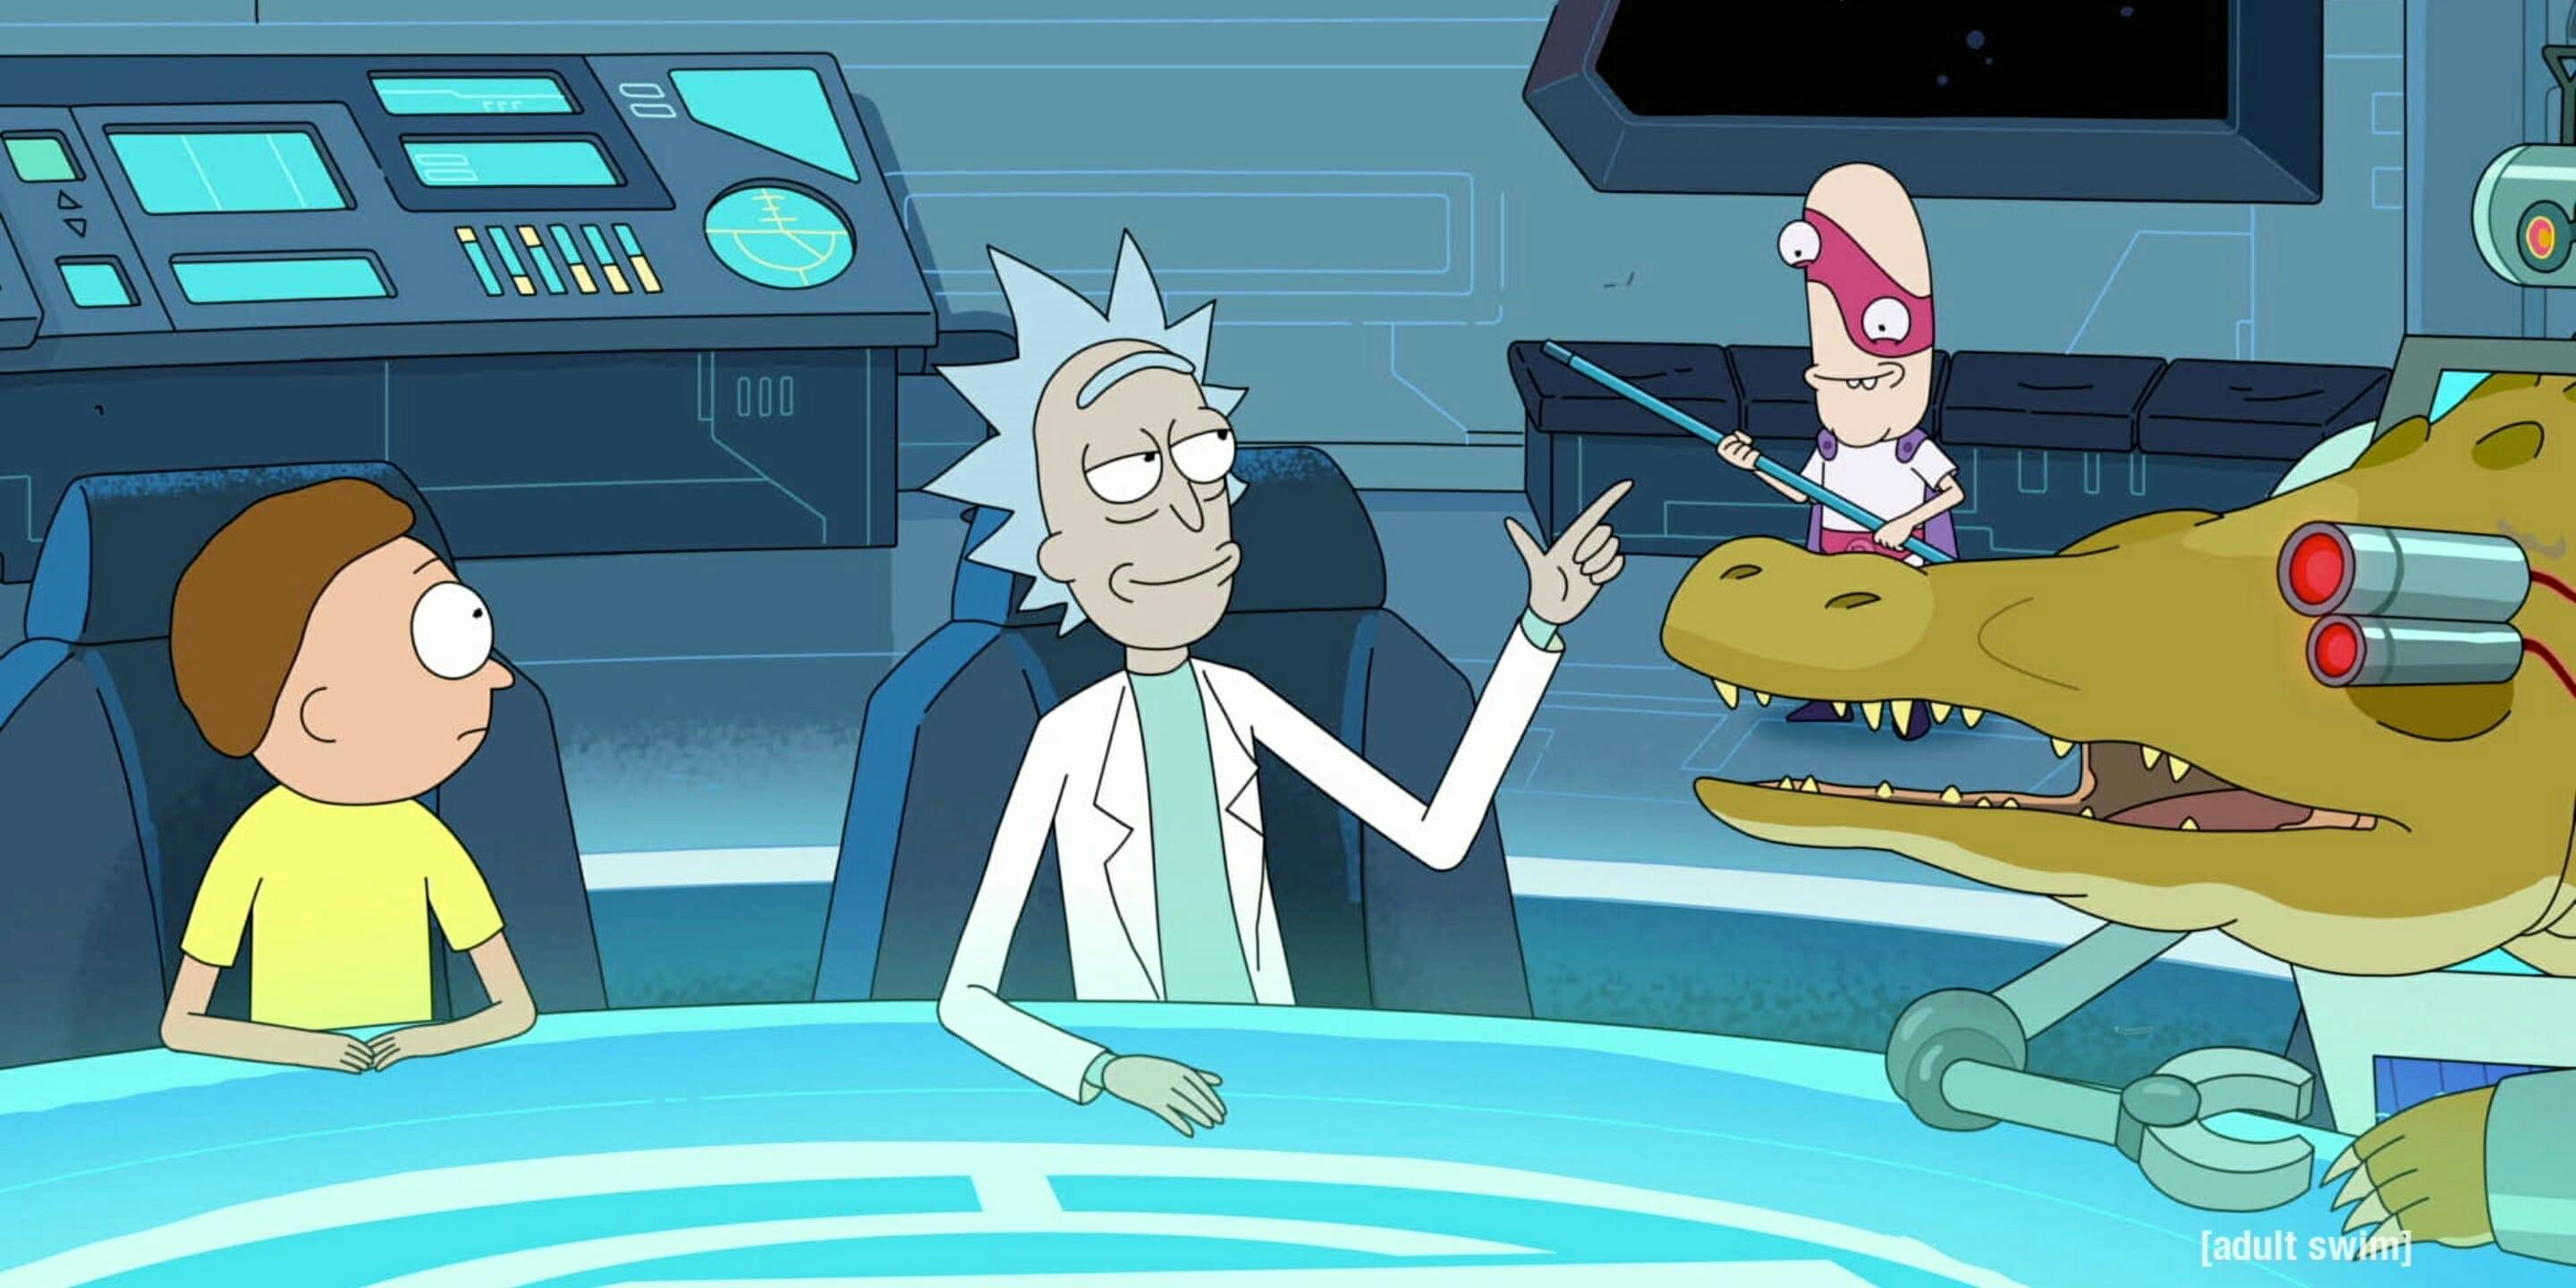 TV Shows Like Rick and Morty: 10 Series to Watch Before Season 4